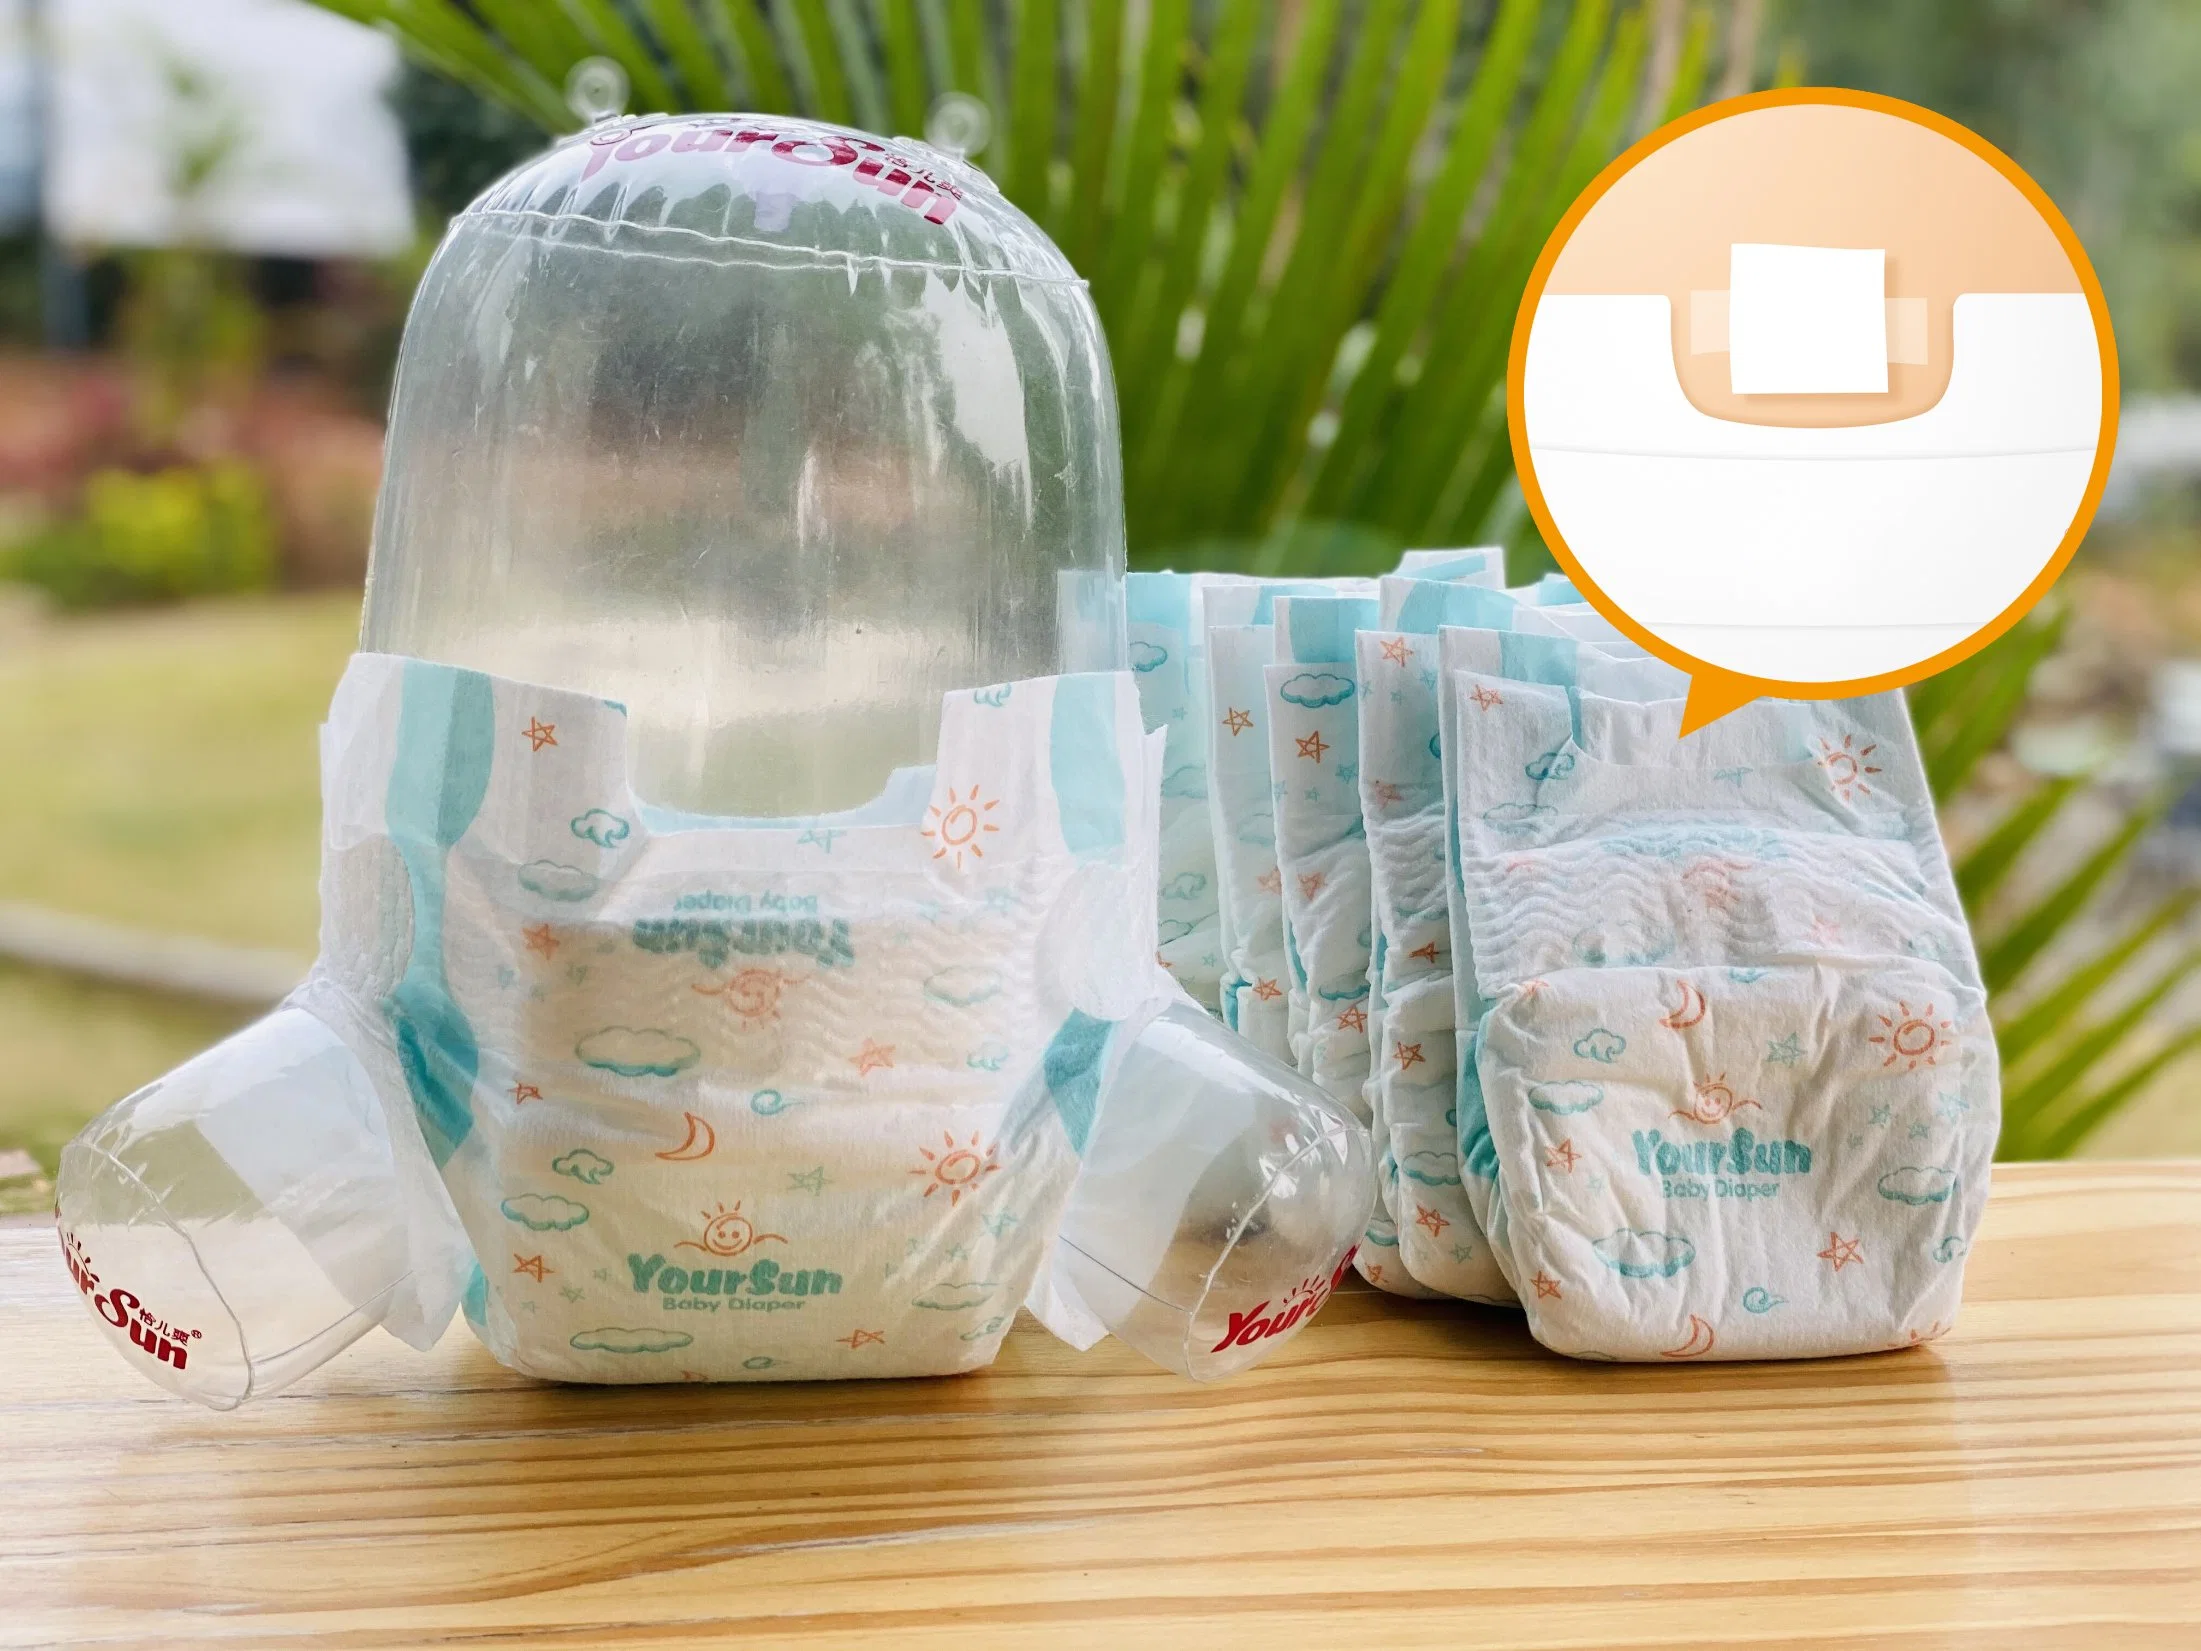 New Born (1-5 kg) Disposable Baby Diaper Taped Diapers / Diapers Baby Care Manufacturer